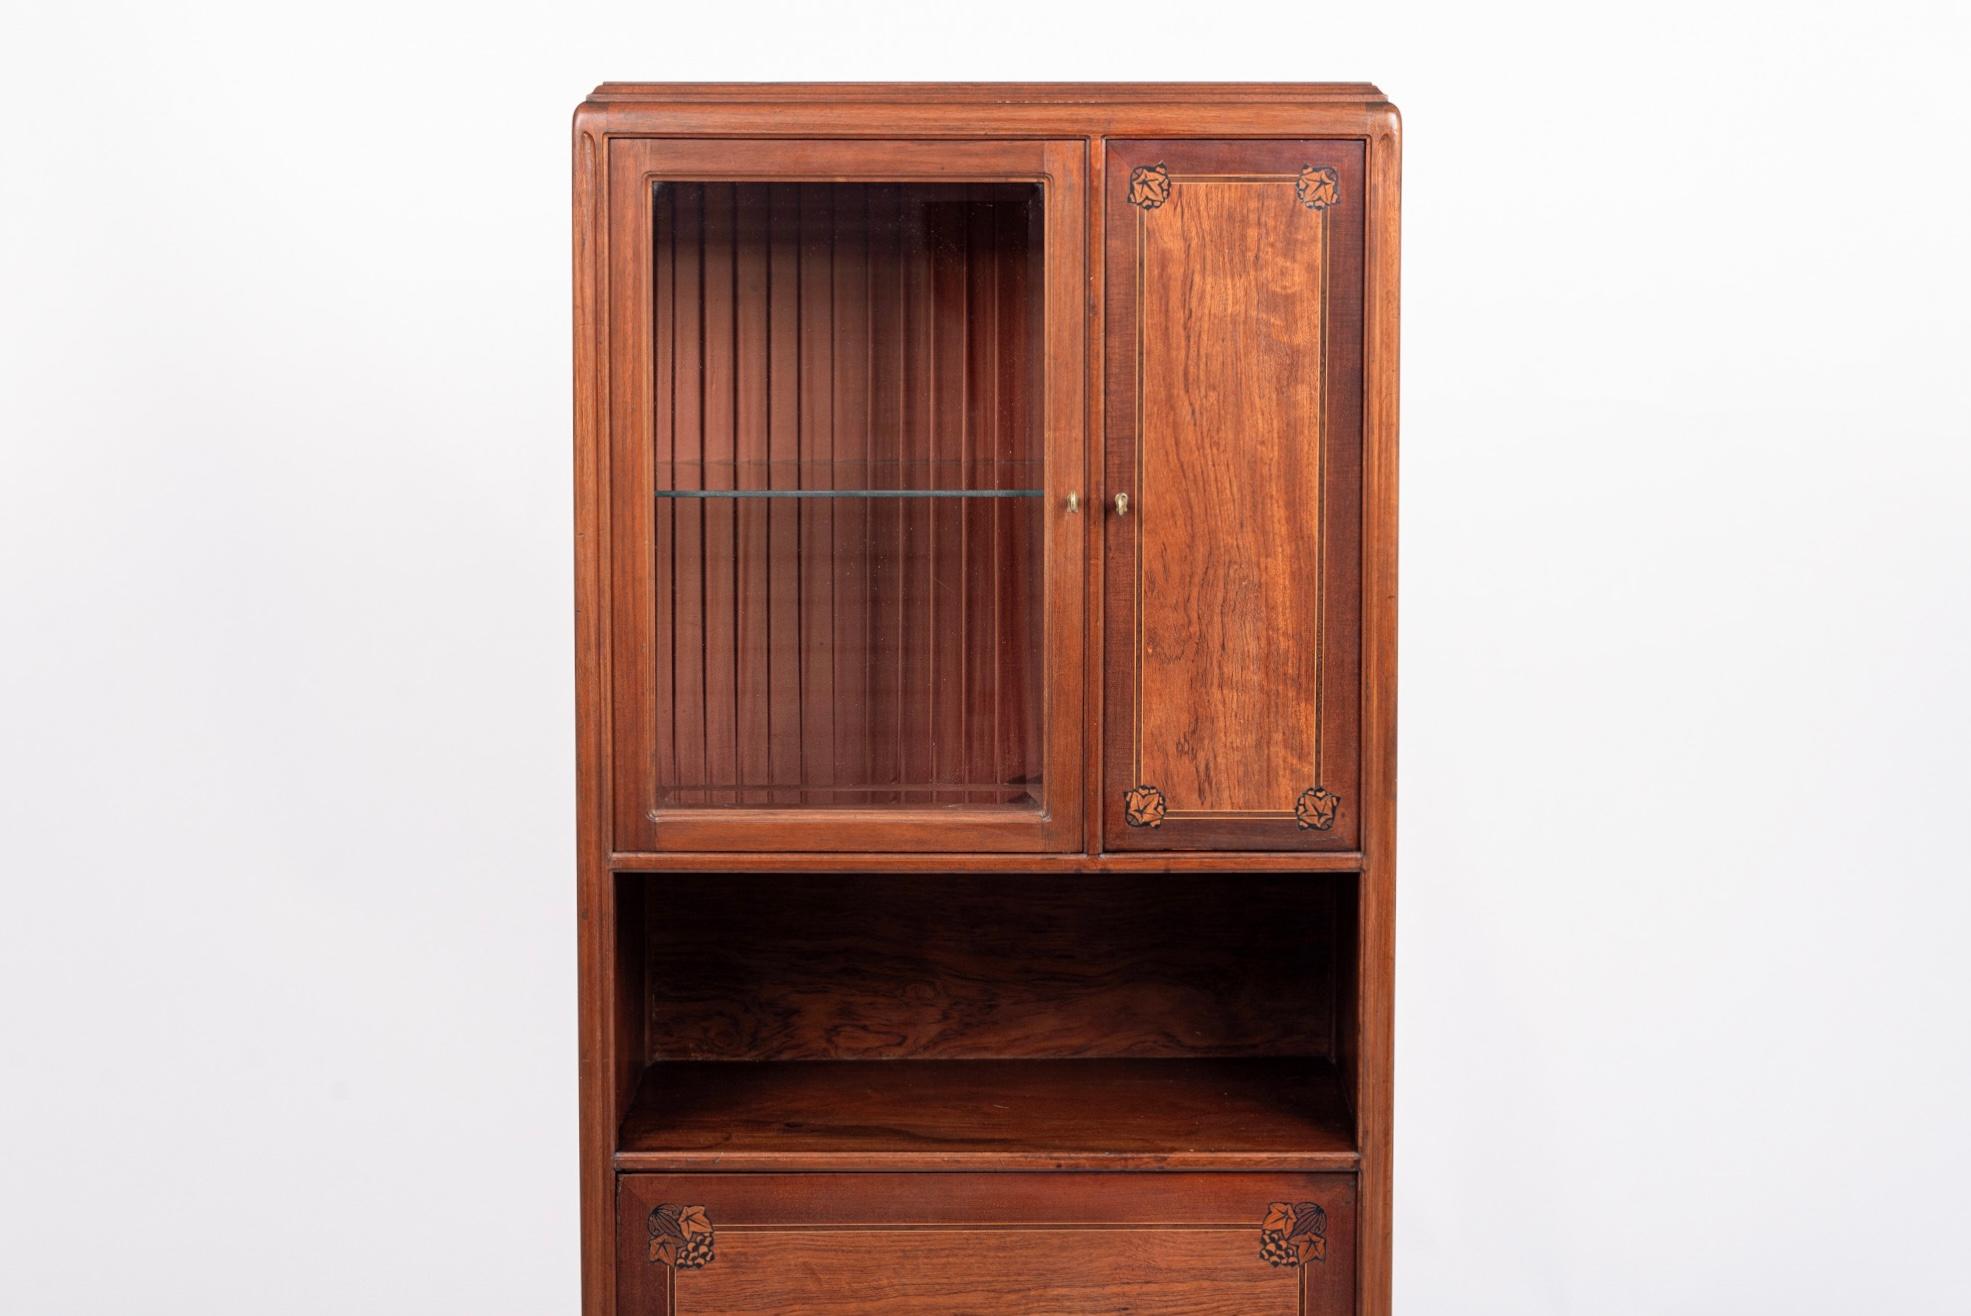 20th Century Antique Art Nouveau Inlaid Wooden Cabinet by Majorelle, France, Signed For Sale